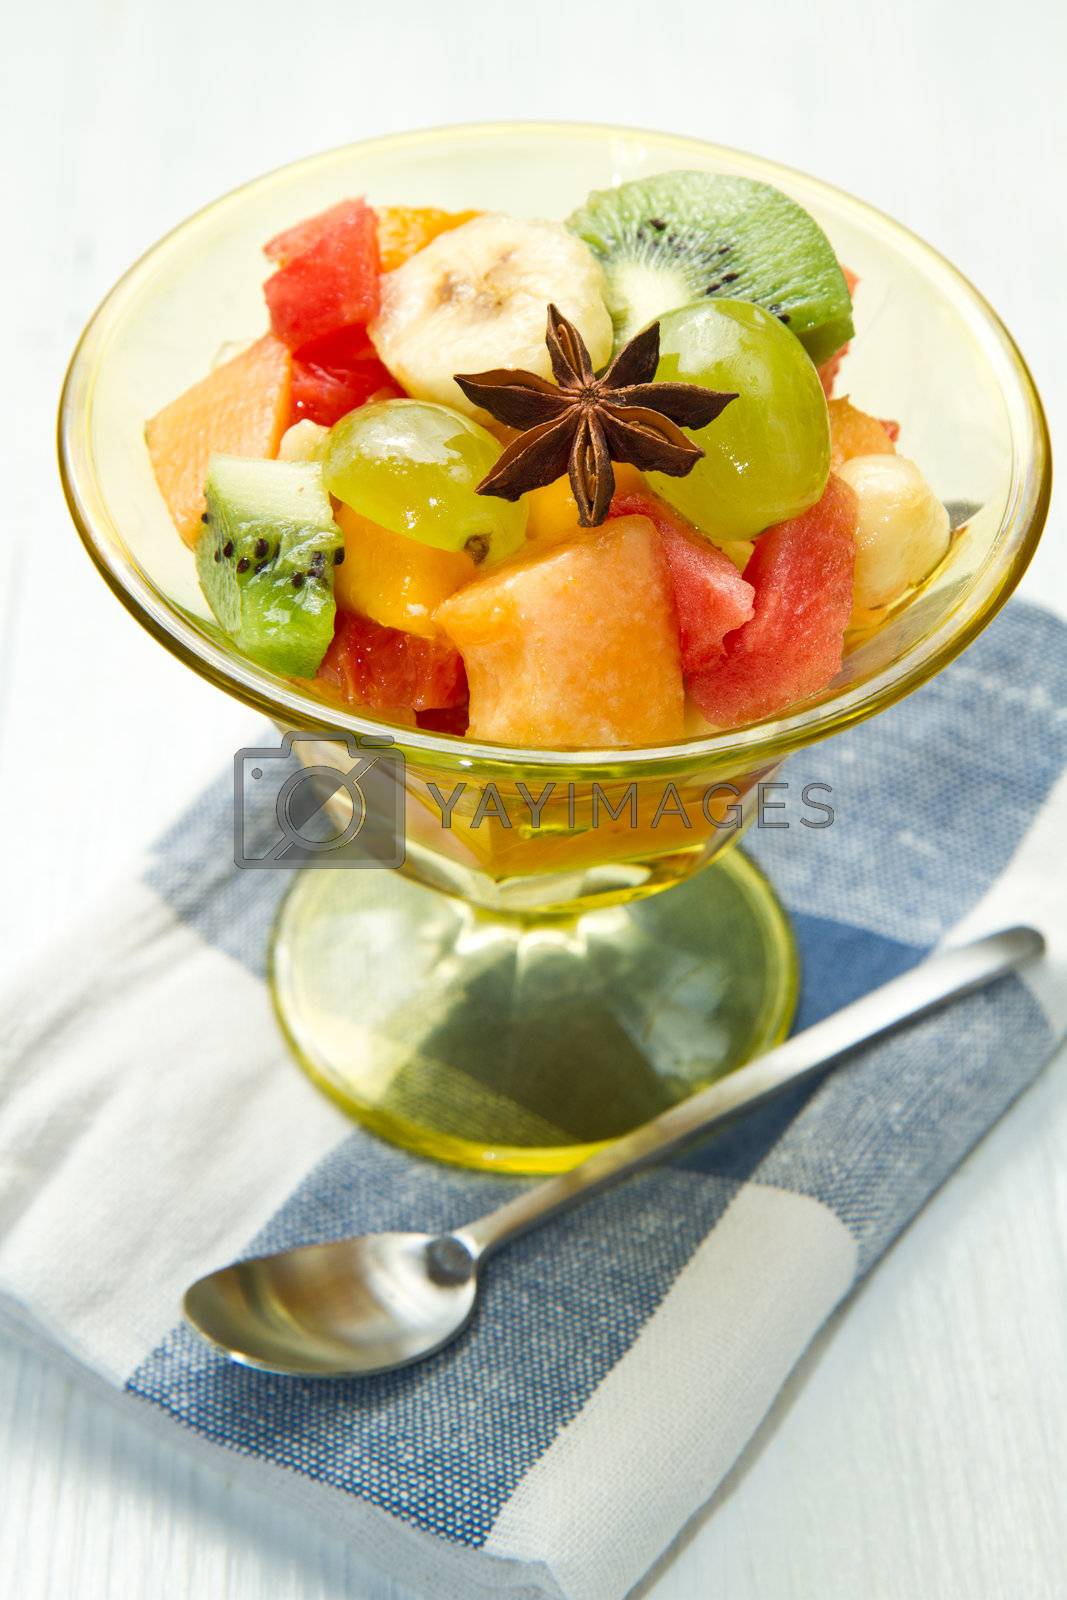 Royalty free image of fruit salad by lsantilli